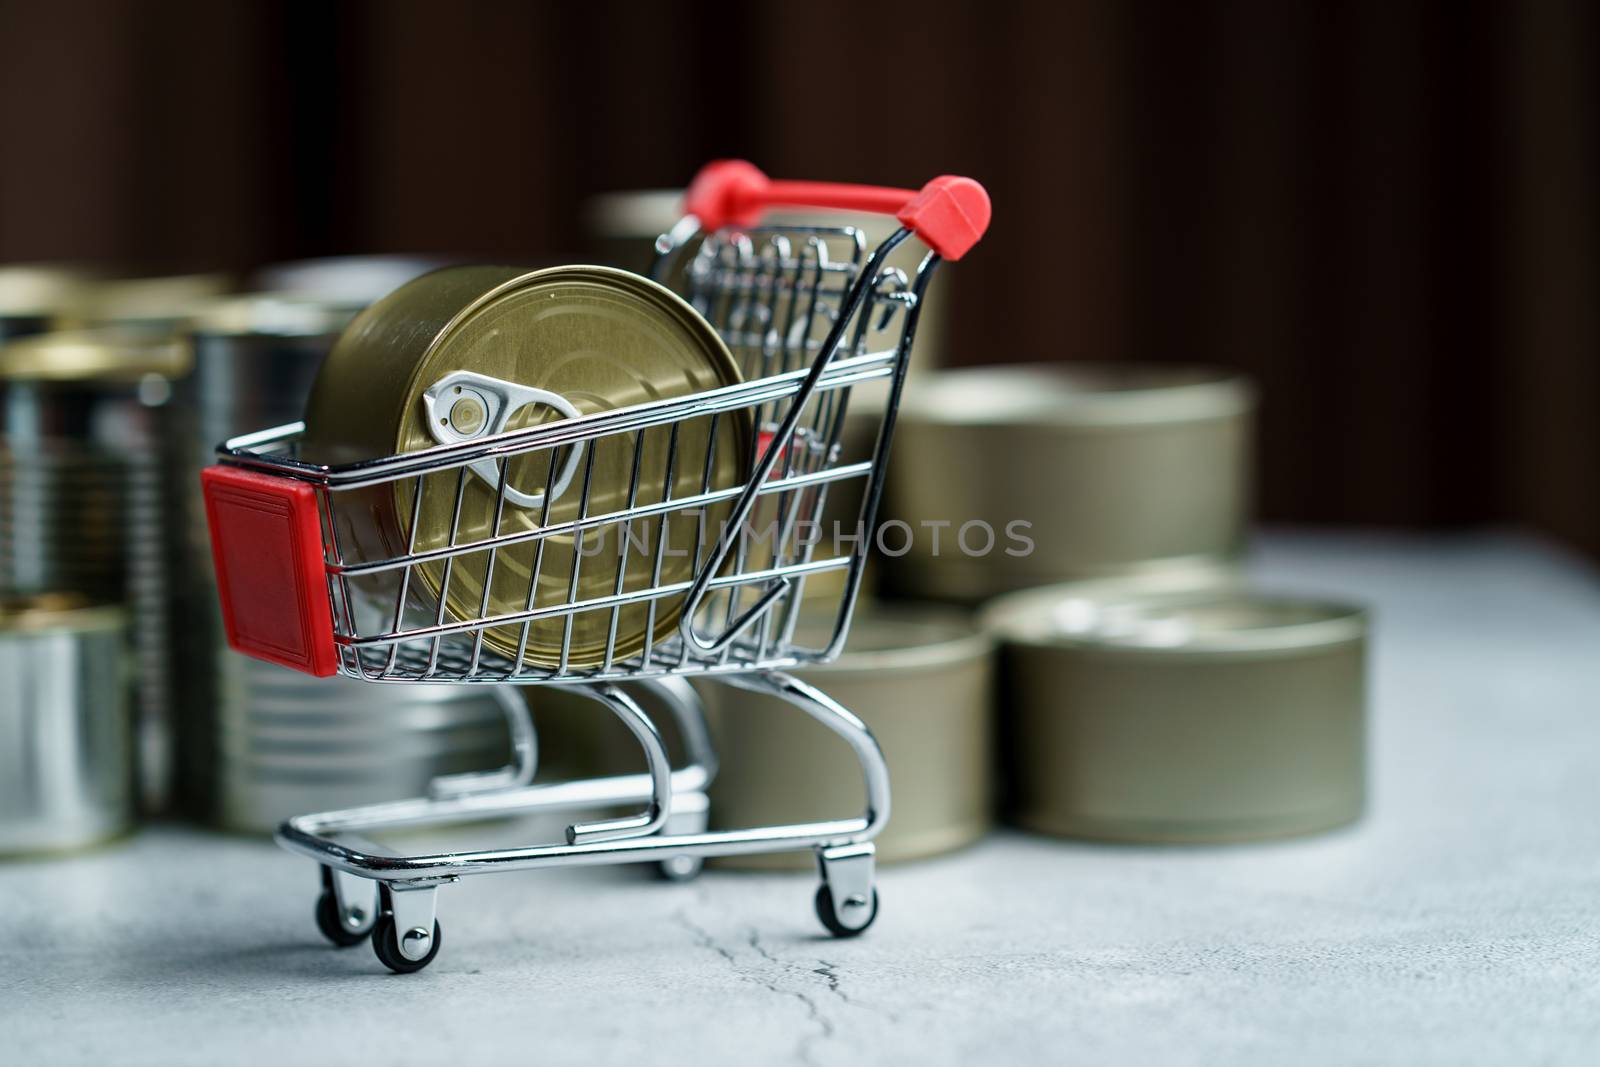 Canned food in shopping cart toy with group of Aluminium canned by sirawit99